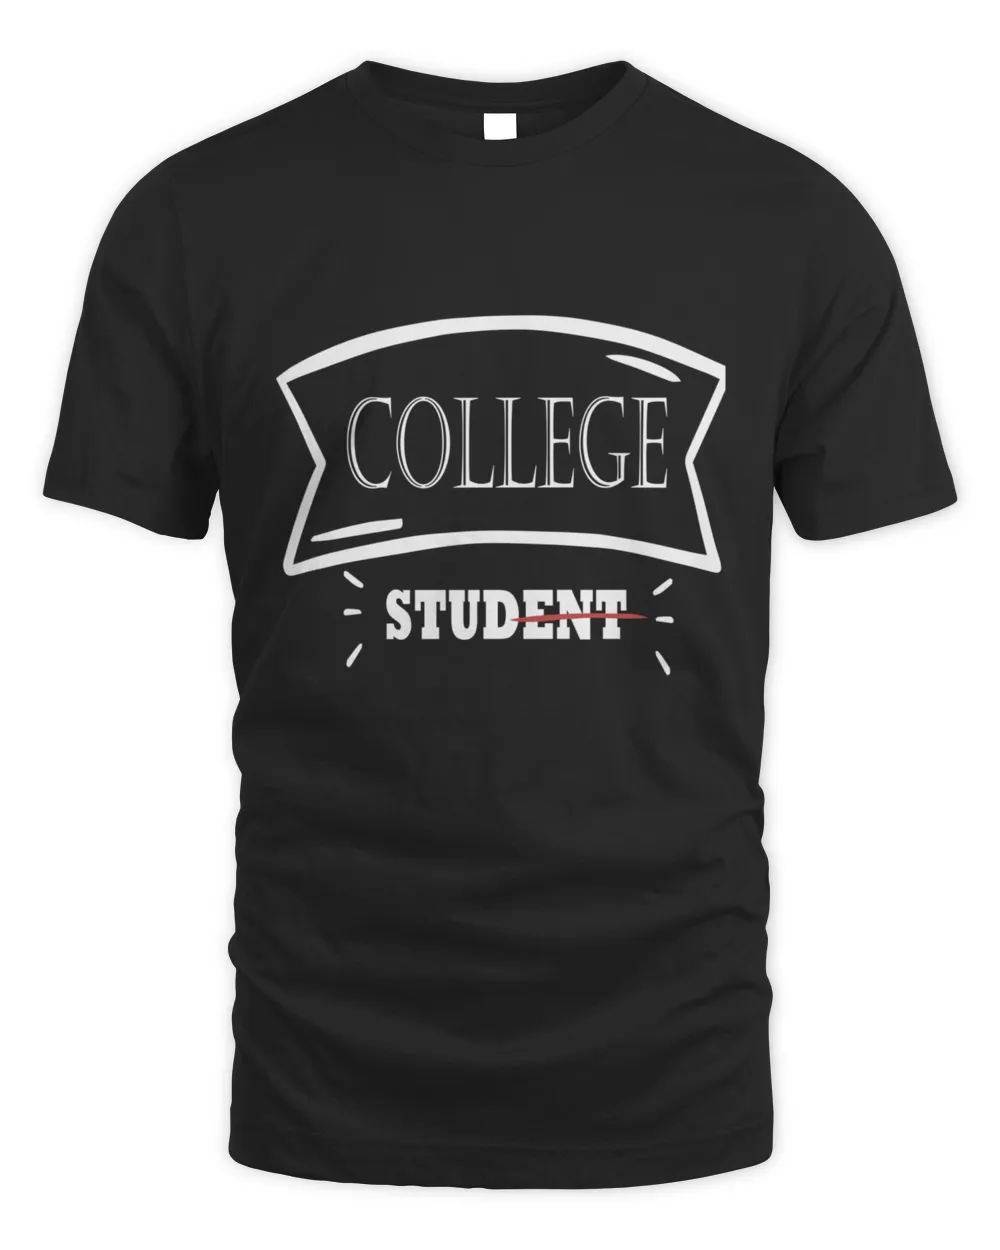 College Student Stud Funny College Apparel Gift Teefunny graphic design 224 T-Shirt